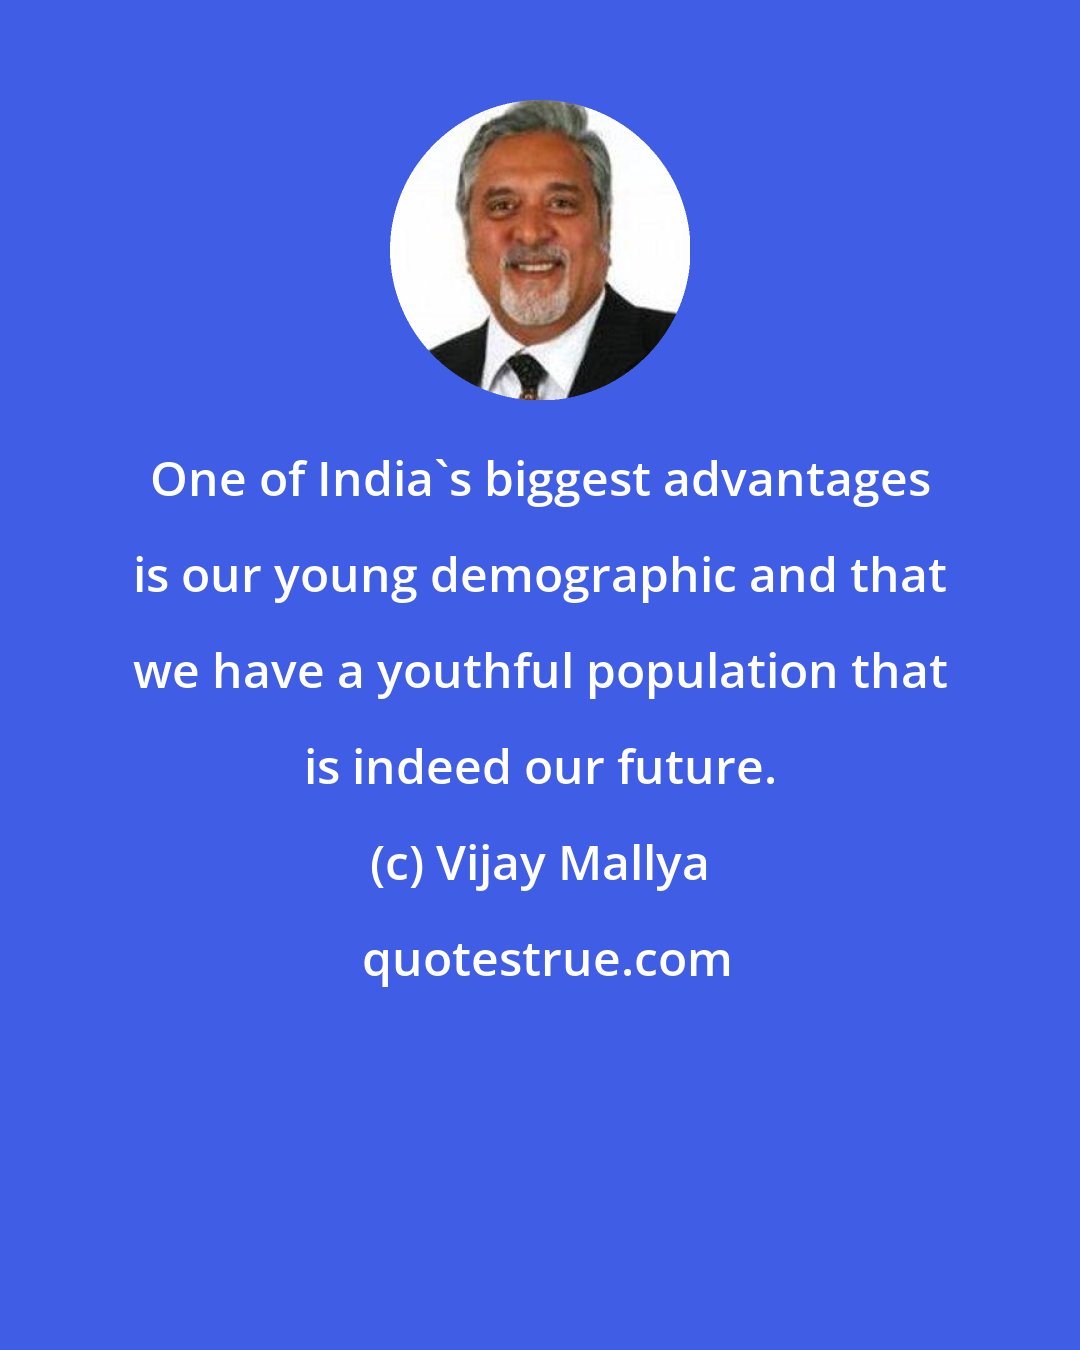 Vijay Mallya: One of India's biggest advantages is our young demographic and that we have a youthful population that is indeed our future.